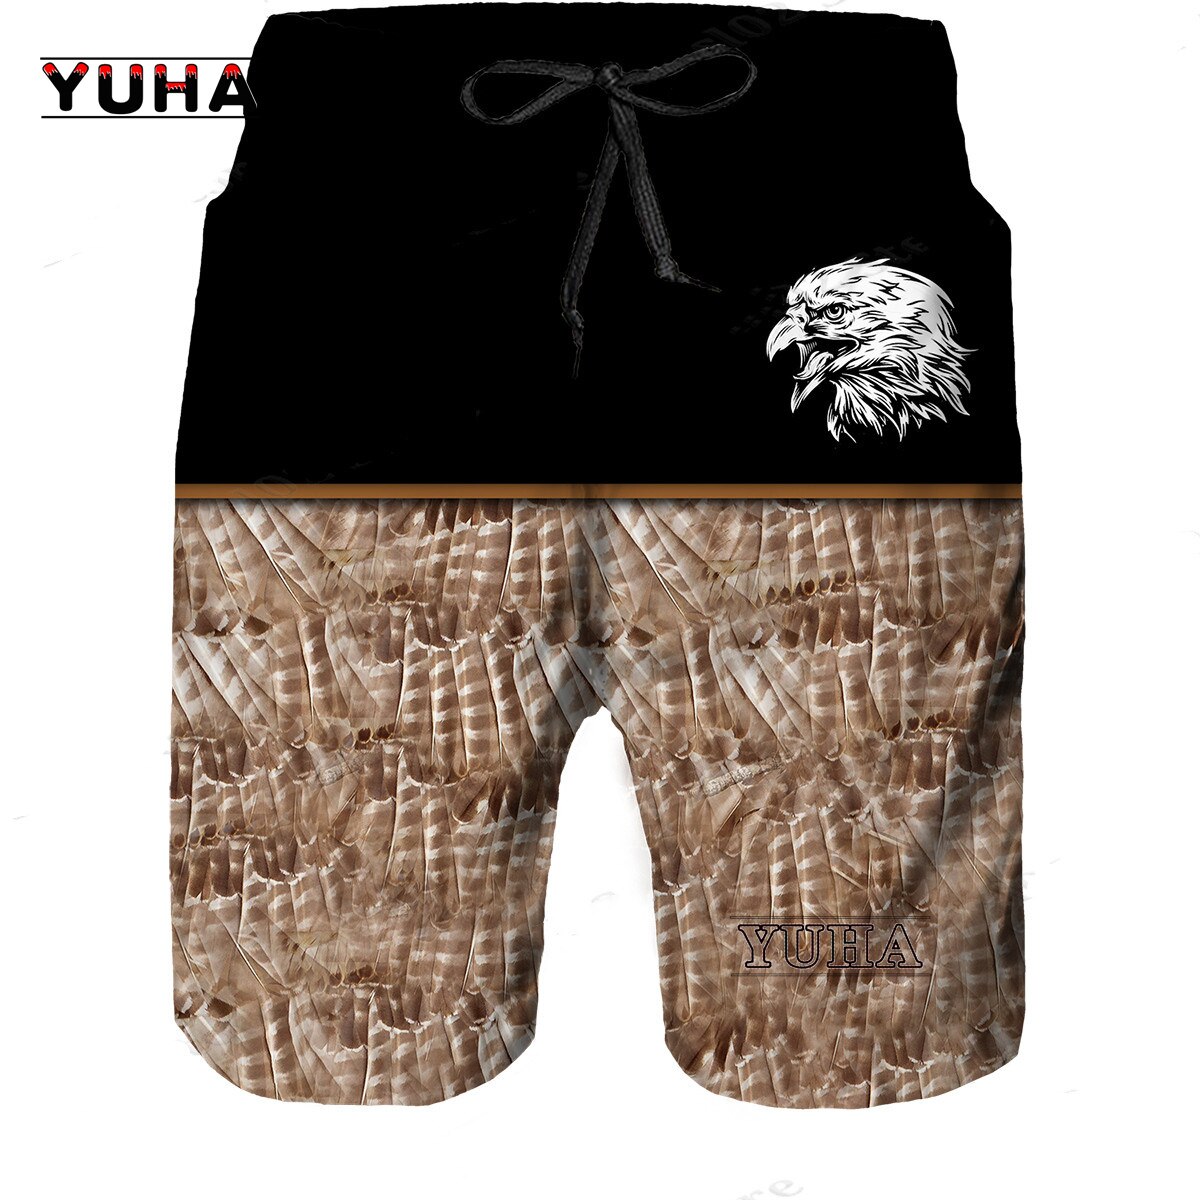 Beach Pants Cool Men White Bald Eagle Animal Camouflage Printed Casual Pants Outdoor Street Style T Shirt Shorts Male Set Chanda